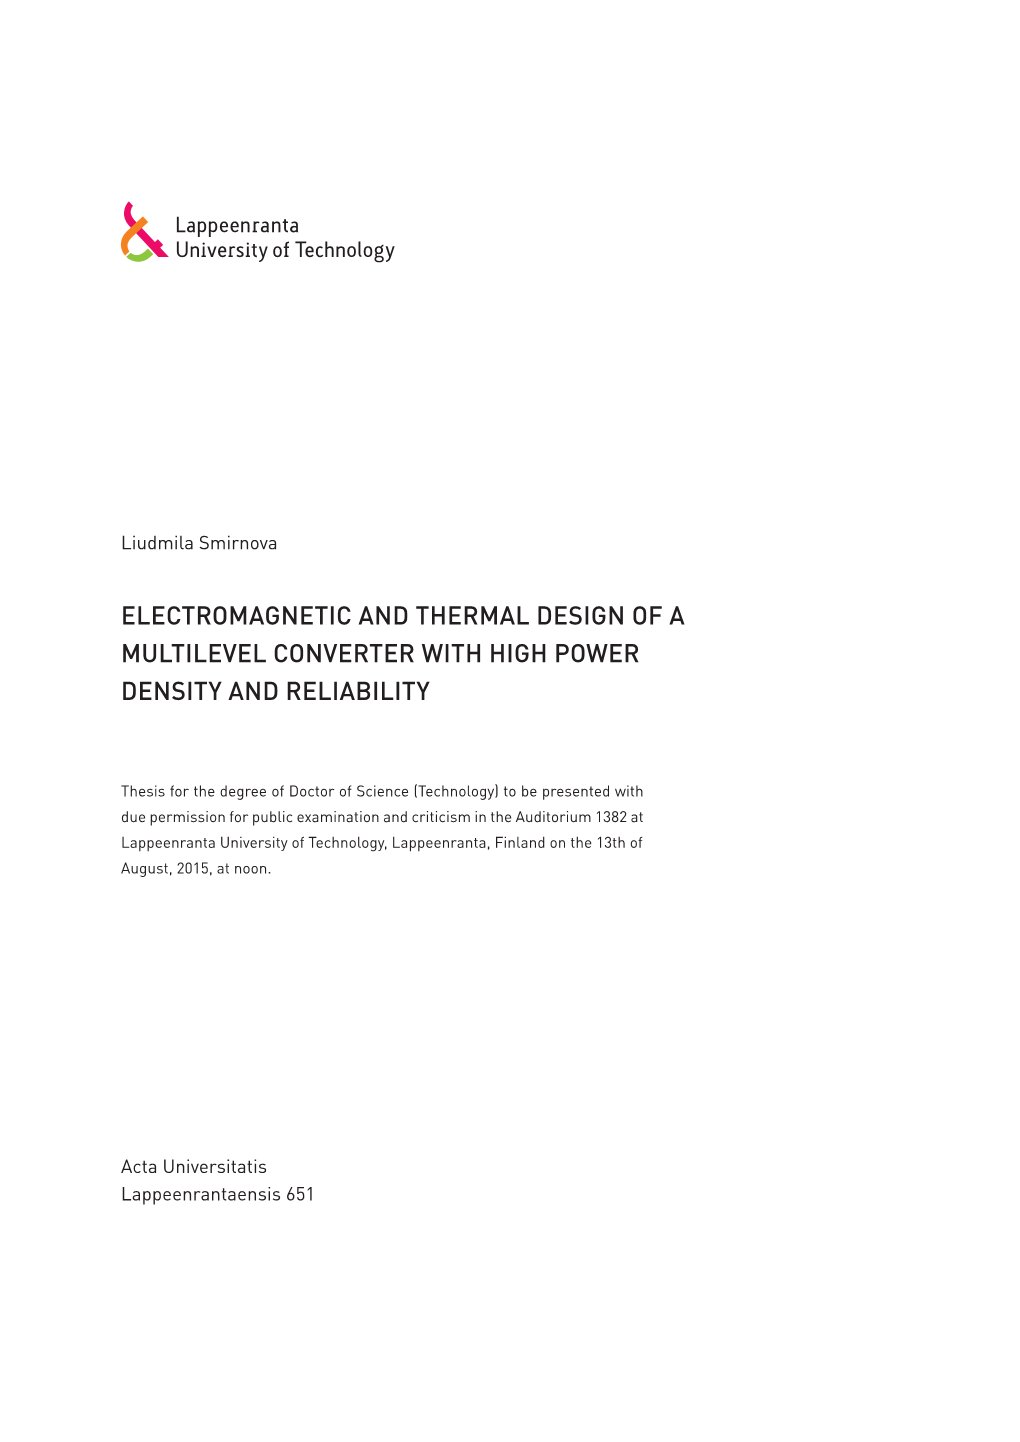 Electromagnetic and Thermal Design of a Multilevel Converter with High Power Density and Reliability